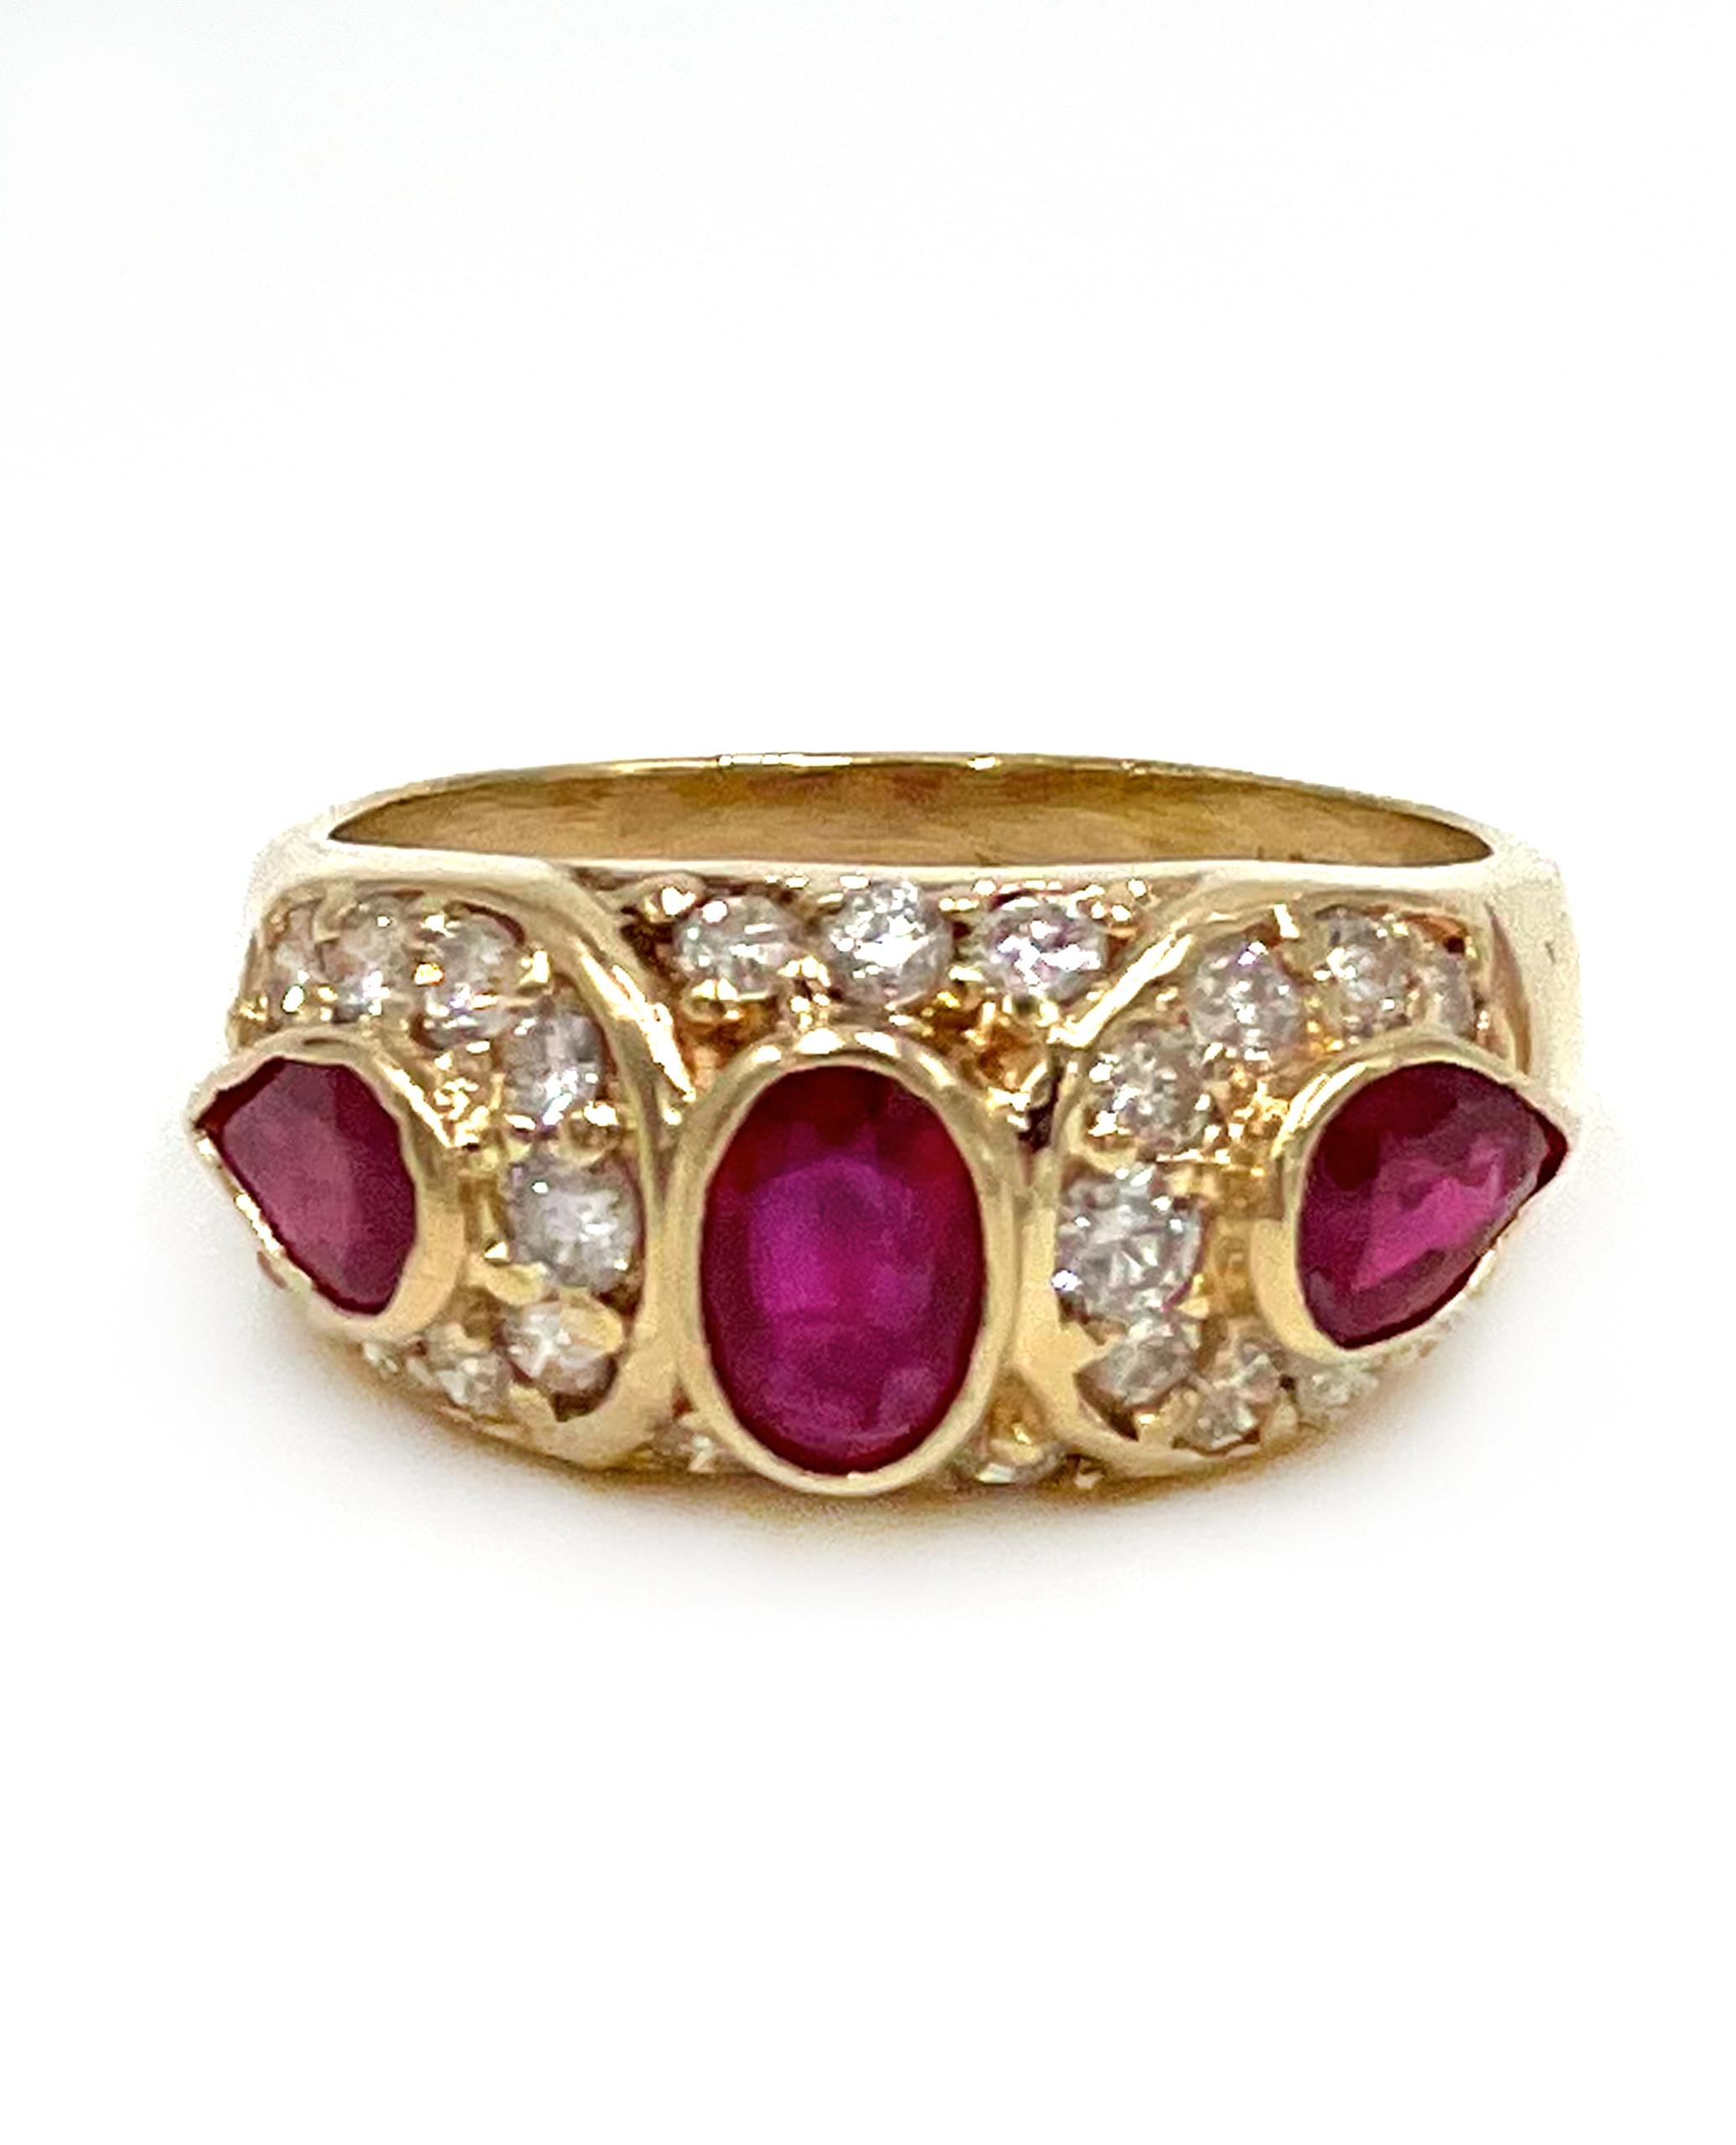 Elegant 14K yellow gold right hand ring with 24 pave set round brilliant-cut diamonds 0.50 carats total weight.  The ring features two pear shape rubies and one oval shape center ruby.  The rubies are bezel set and weigh 1.50 carats total weight.

*